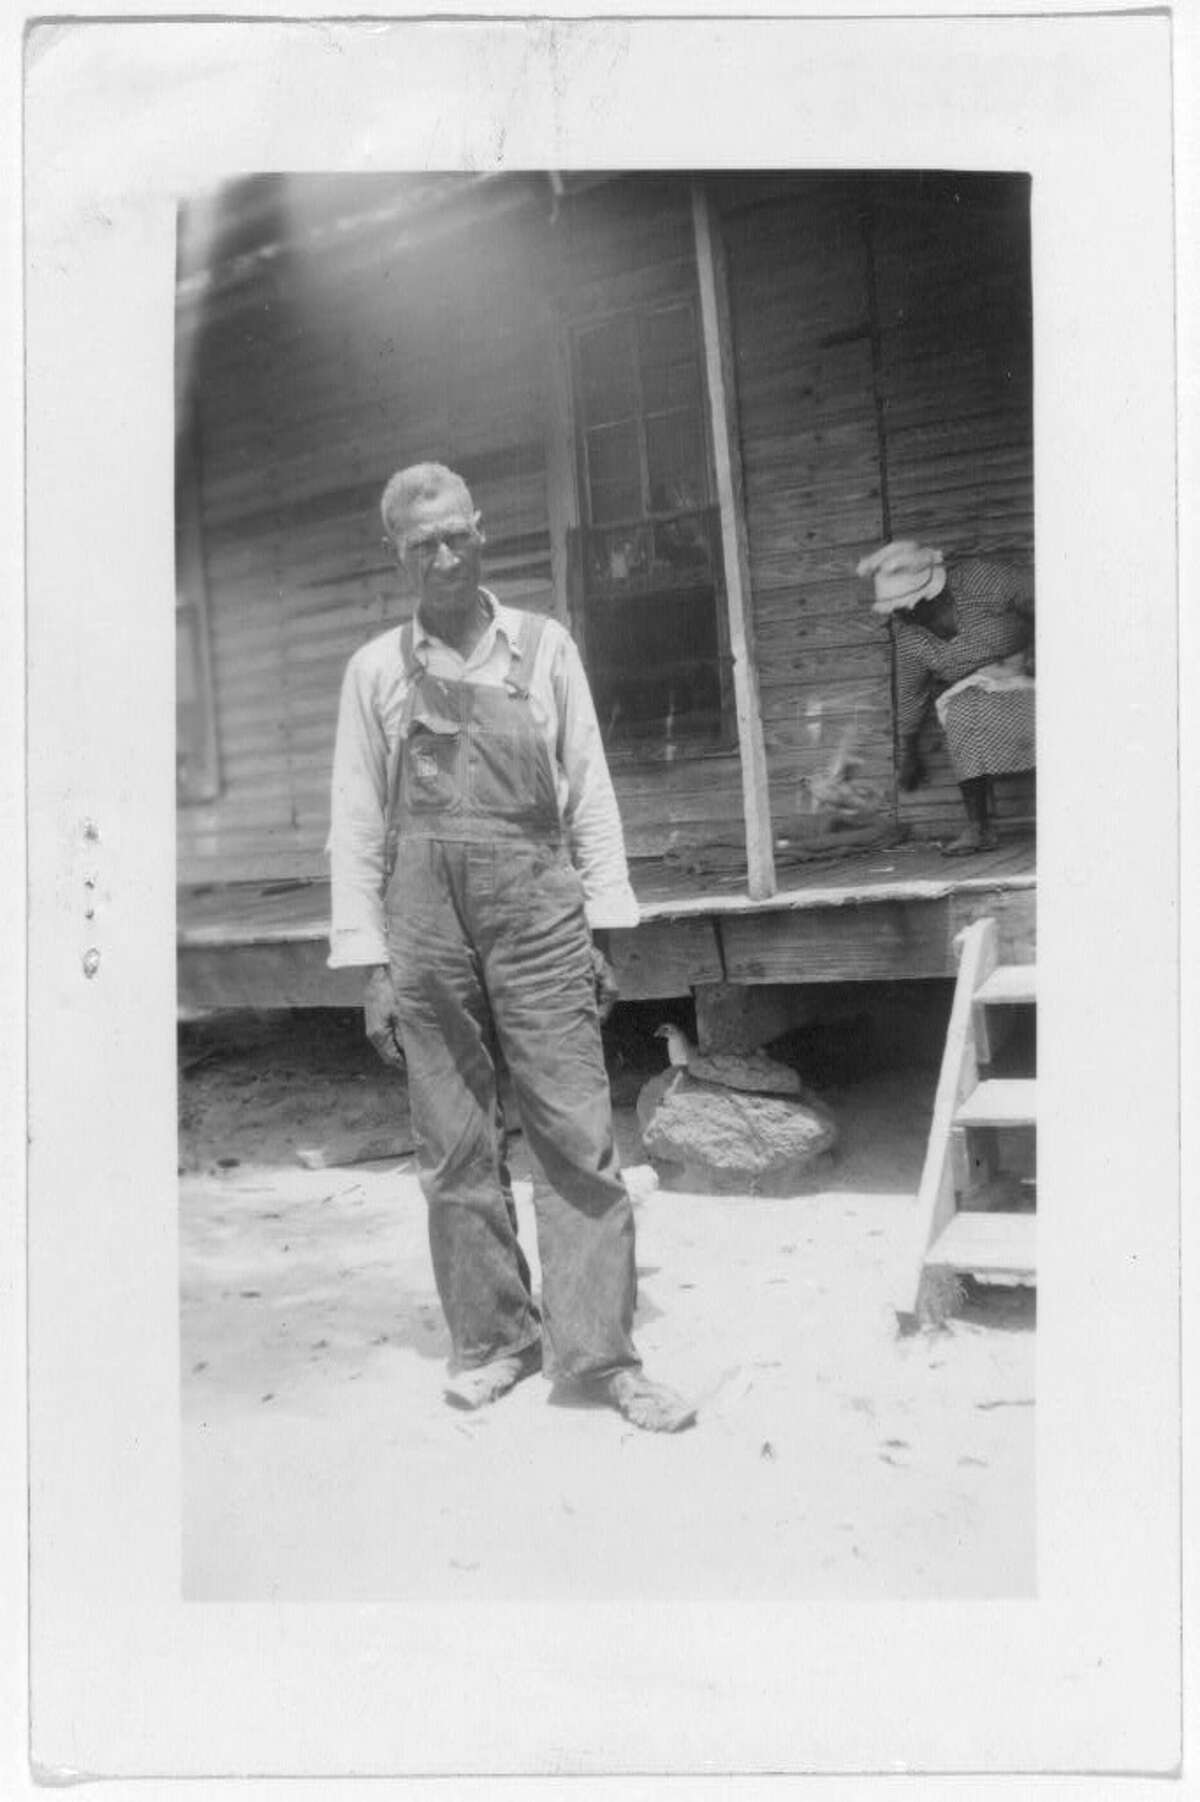 Historical photos show faces of former slaves living in San Antonio